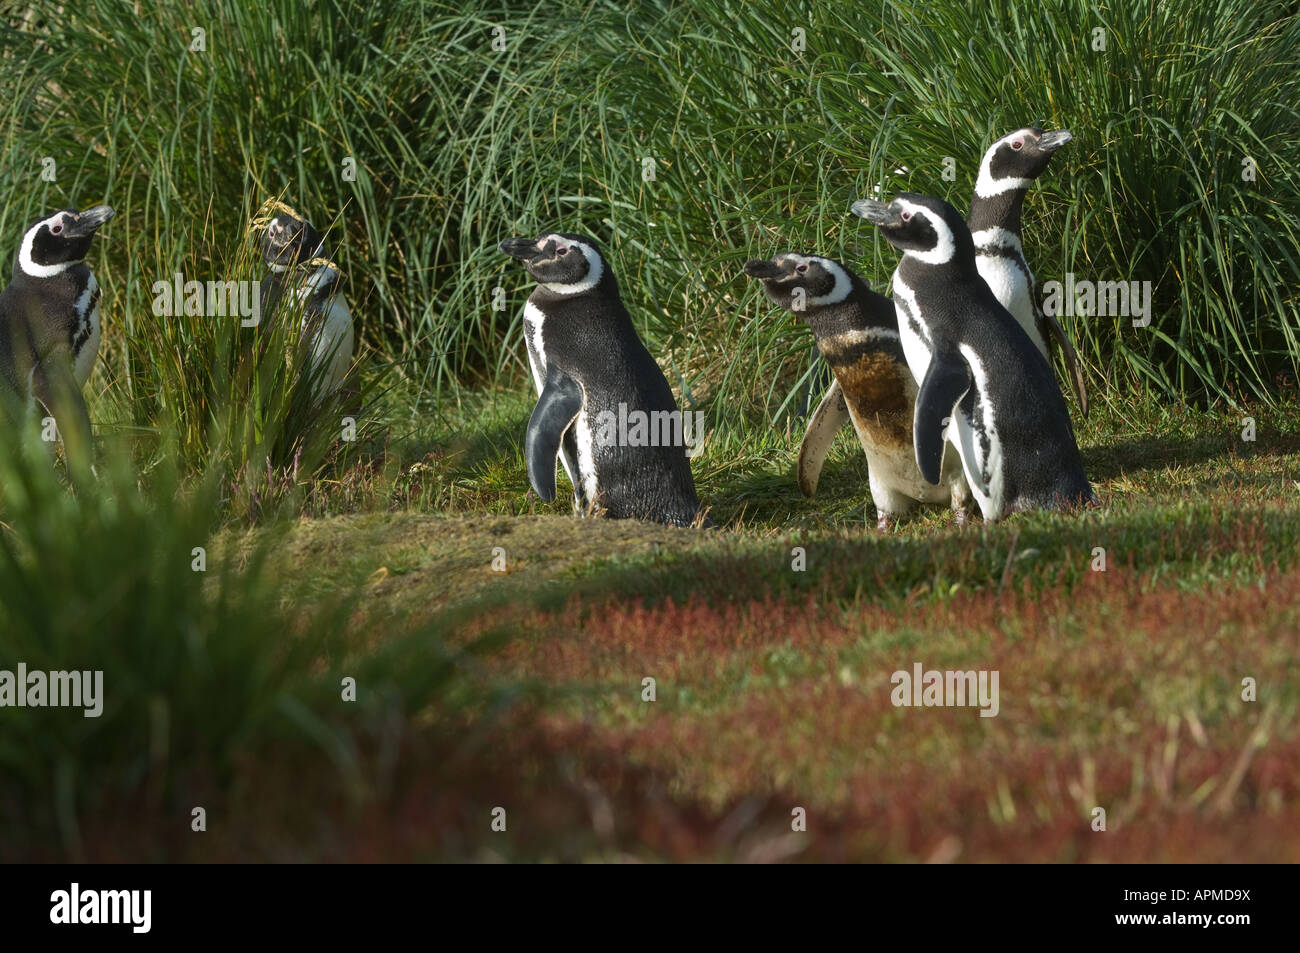 Magellanic Penguin Spheniscus magellanicus adult coming out of tussac grass into meadow with flowering Rumex acetosella Stock Photo